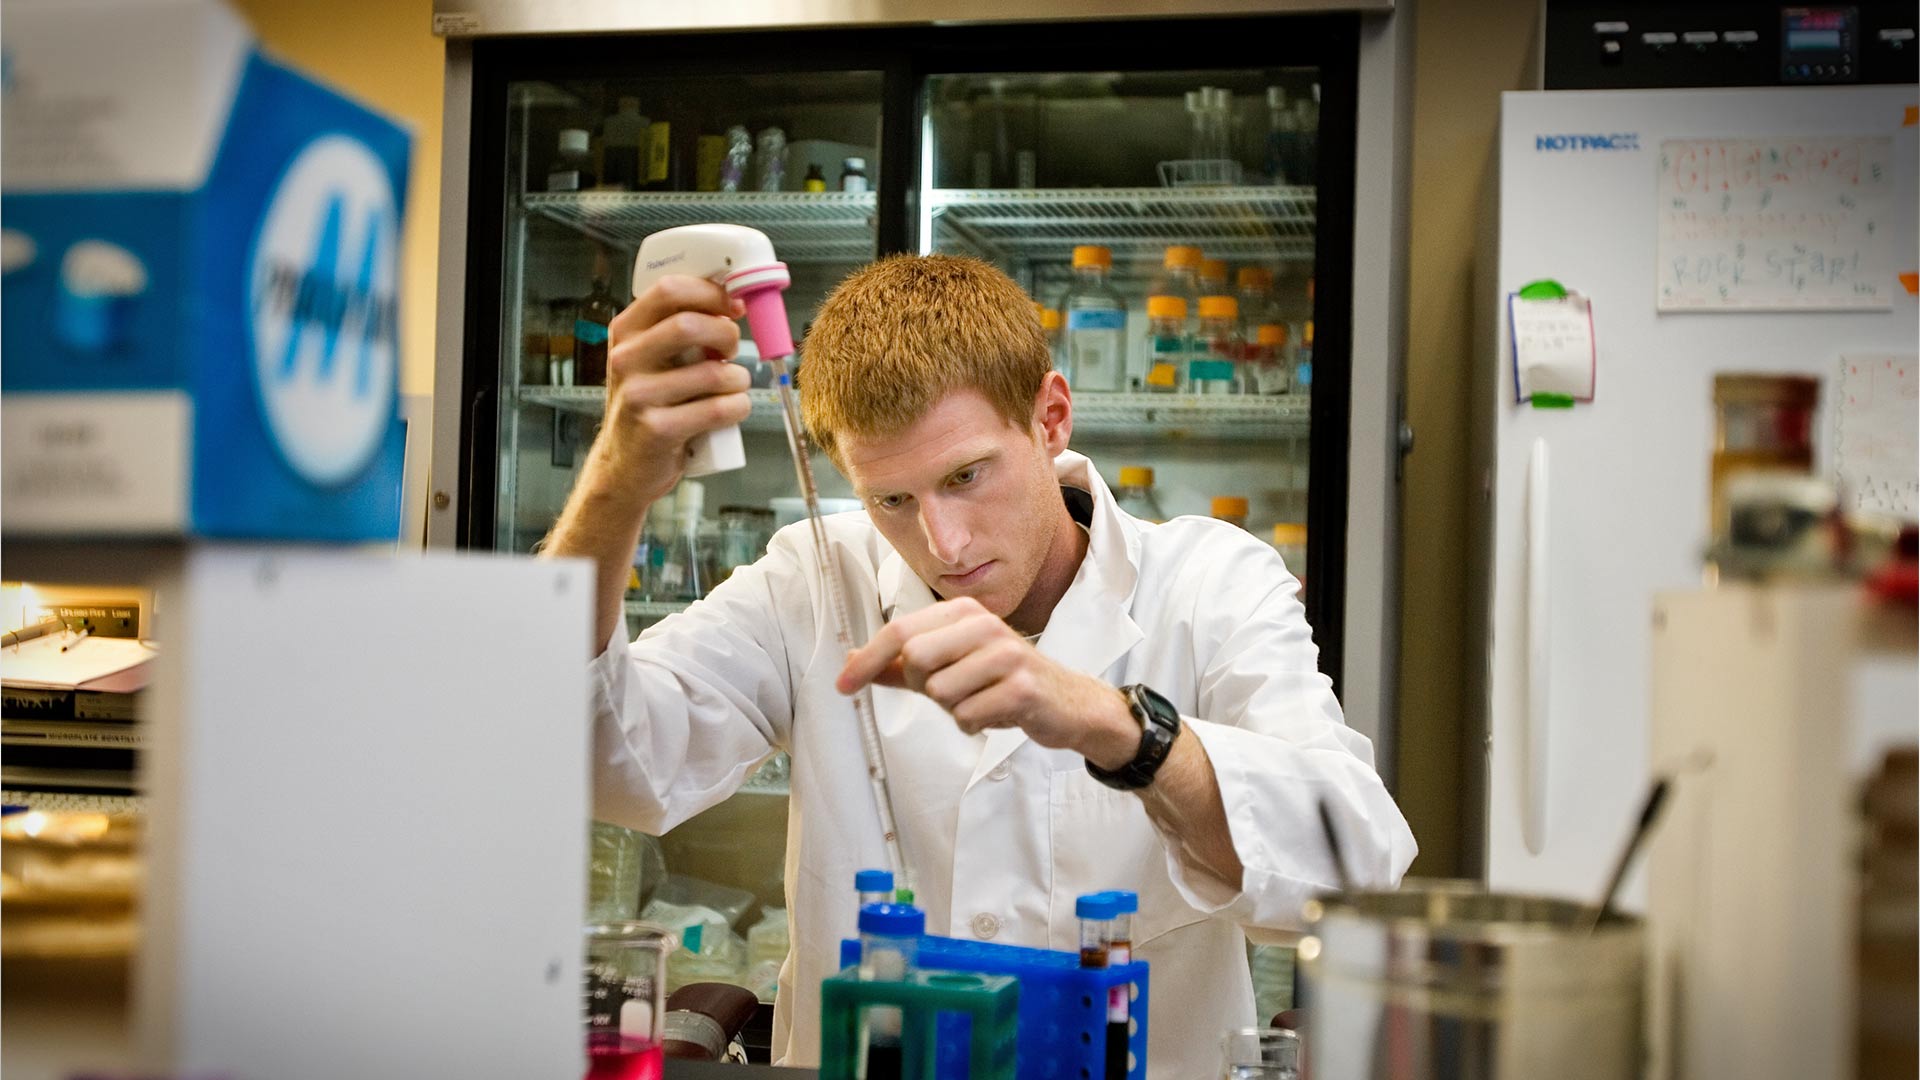 Researcher looking a glass pipette in a lab.